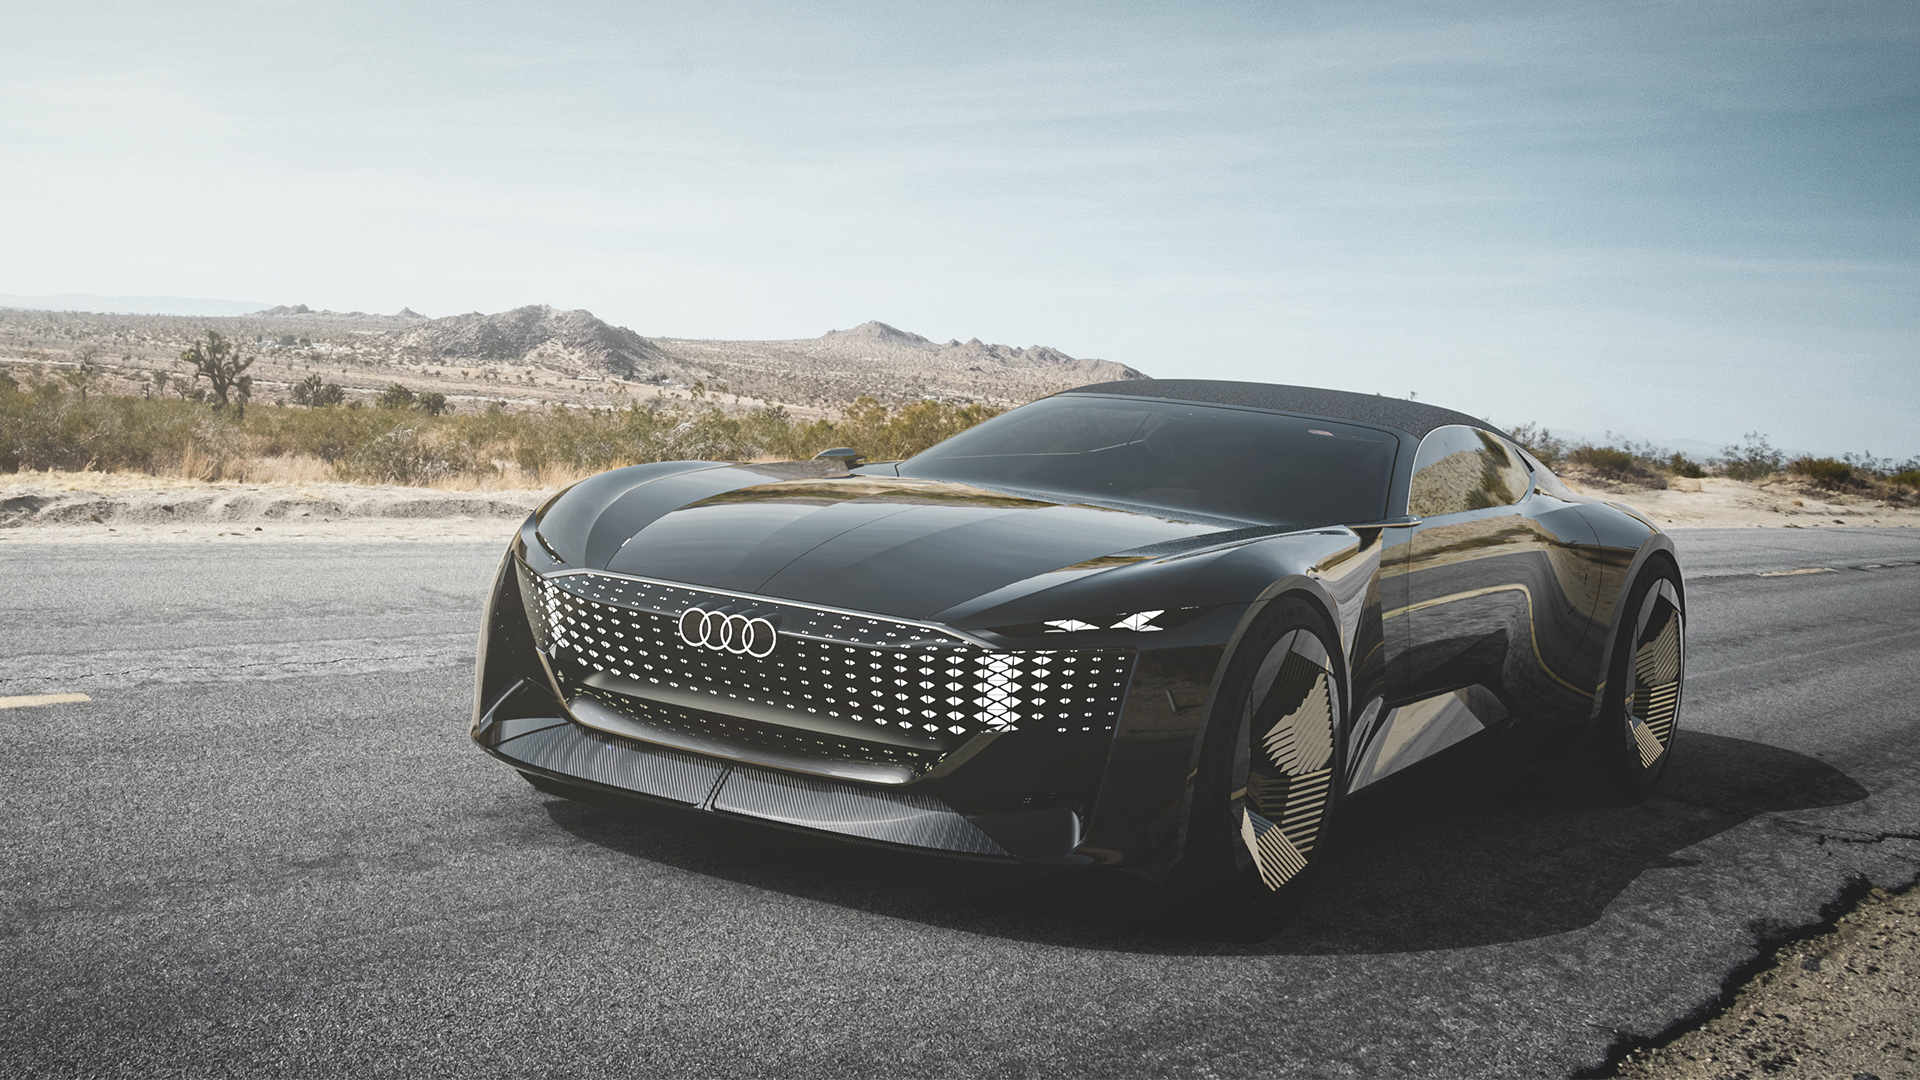 Audi skysphere concept viewed from the front